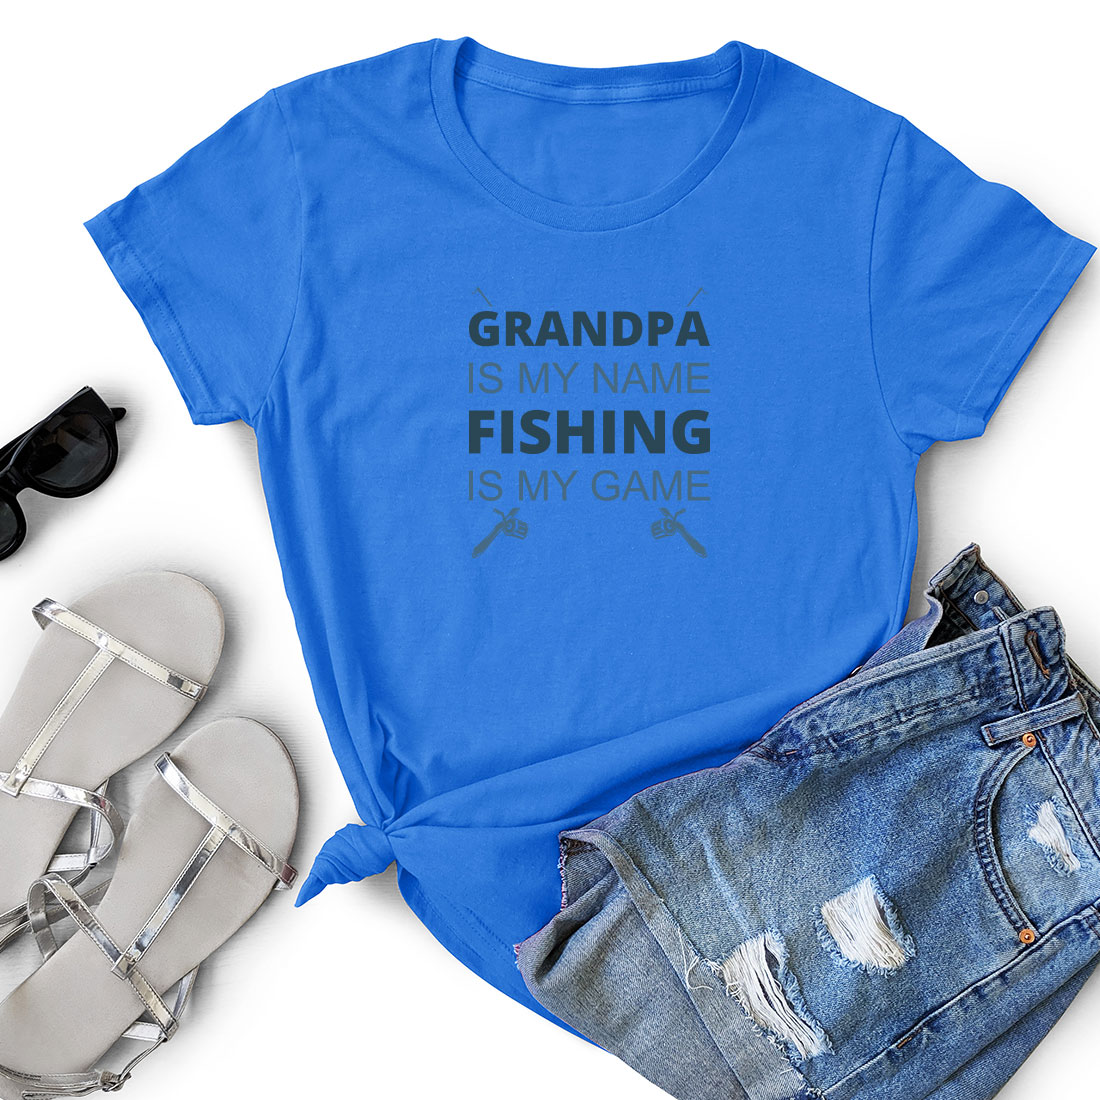 T - shirt that says grandpa is my name fishing is my game.